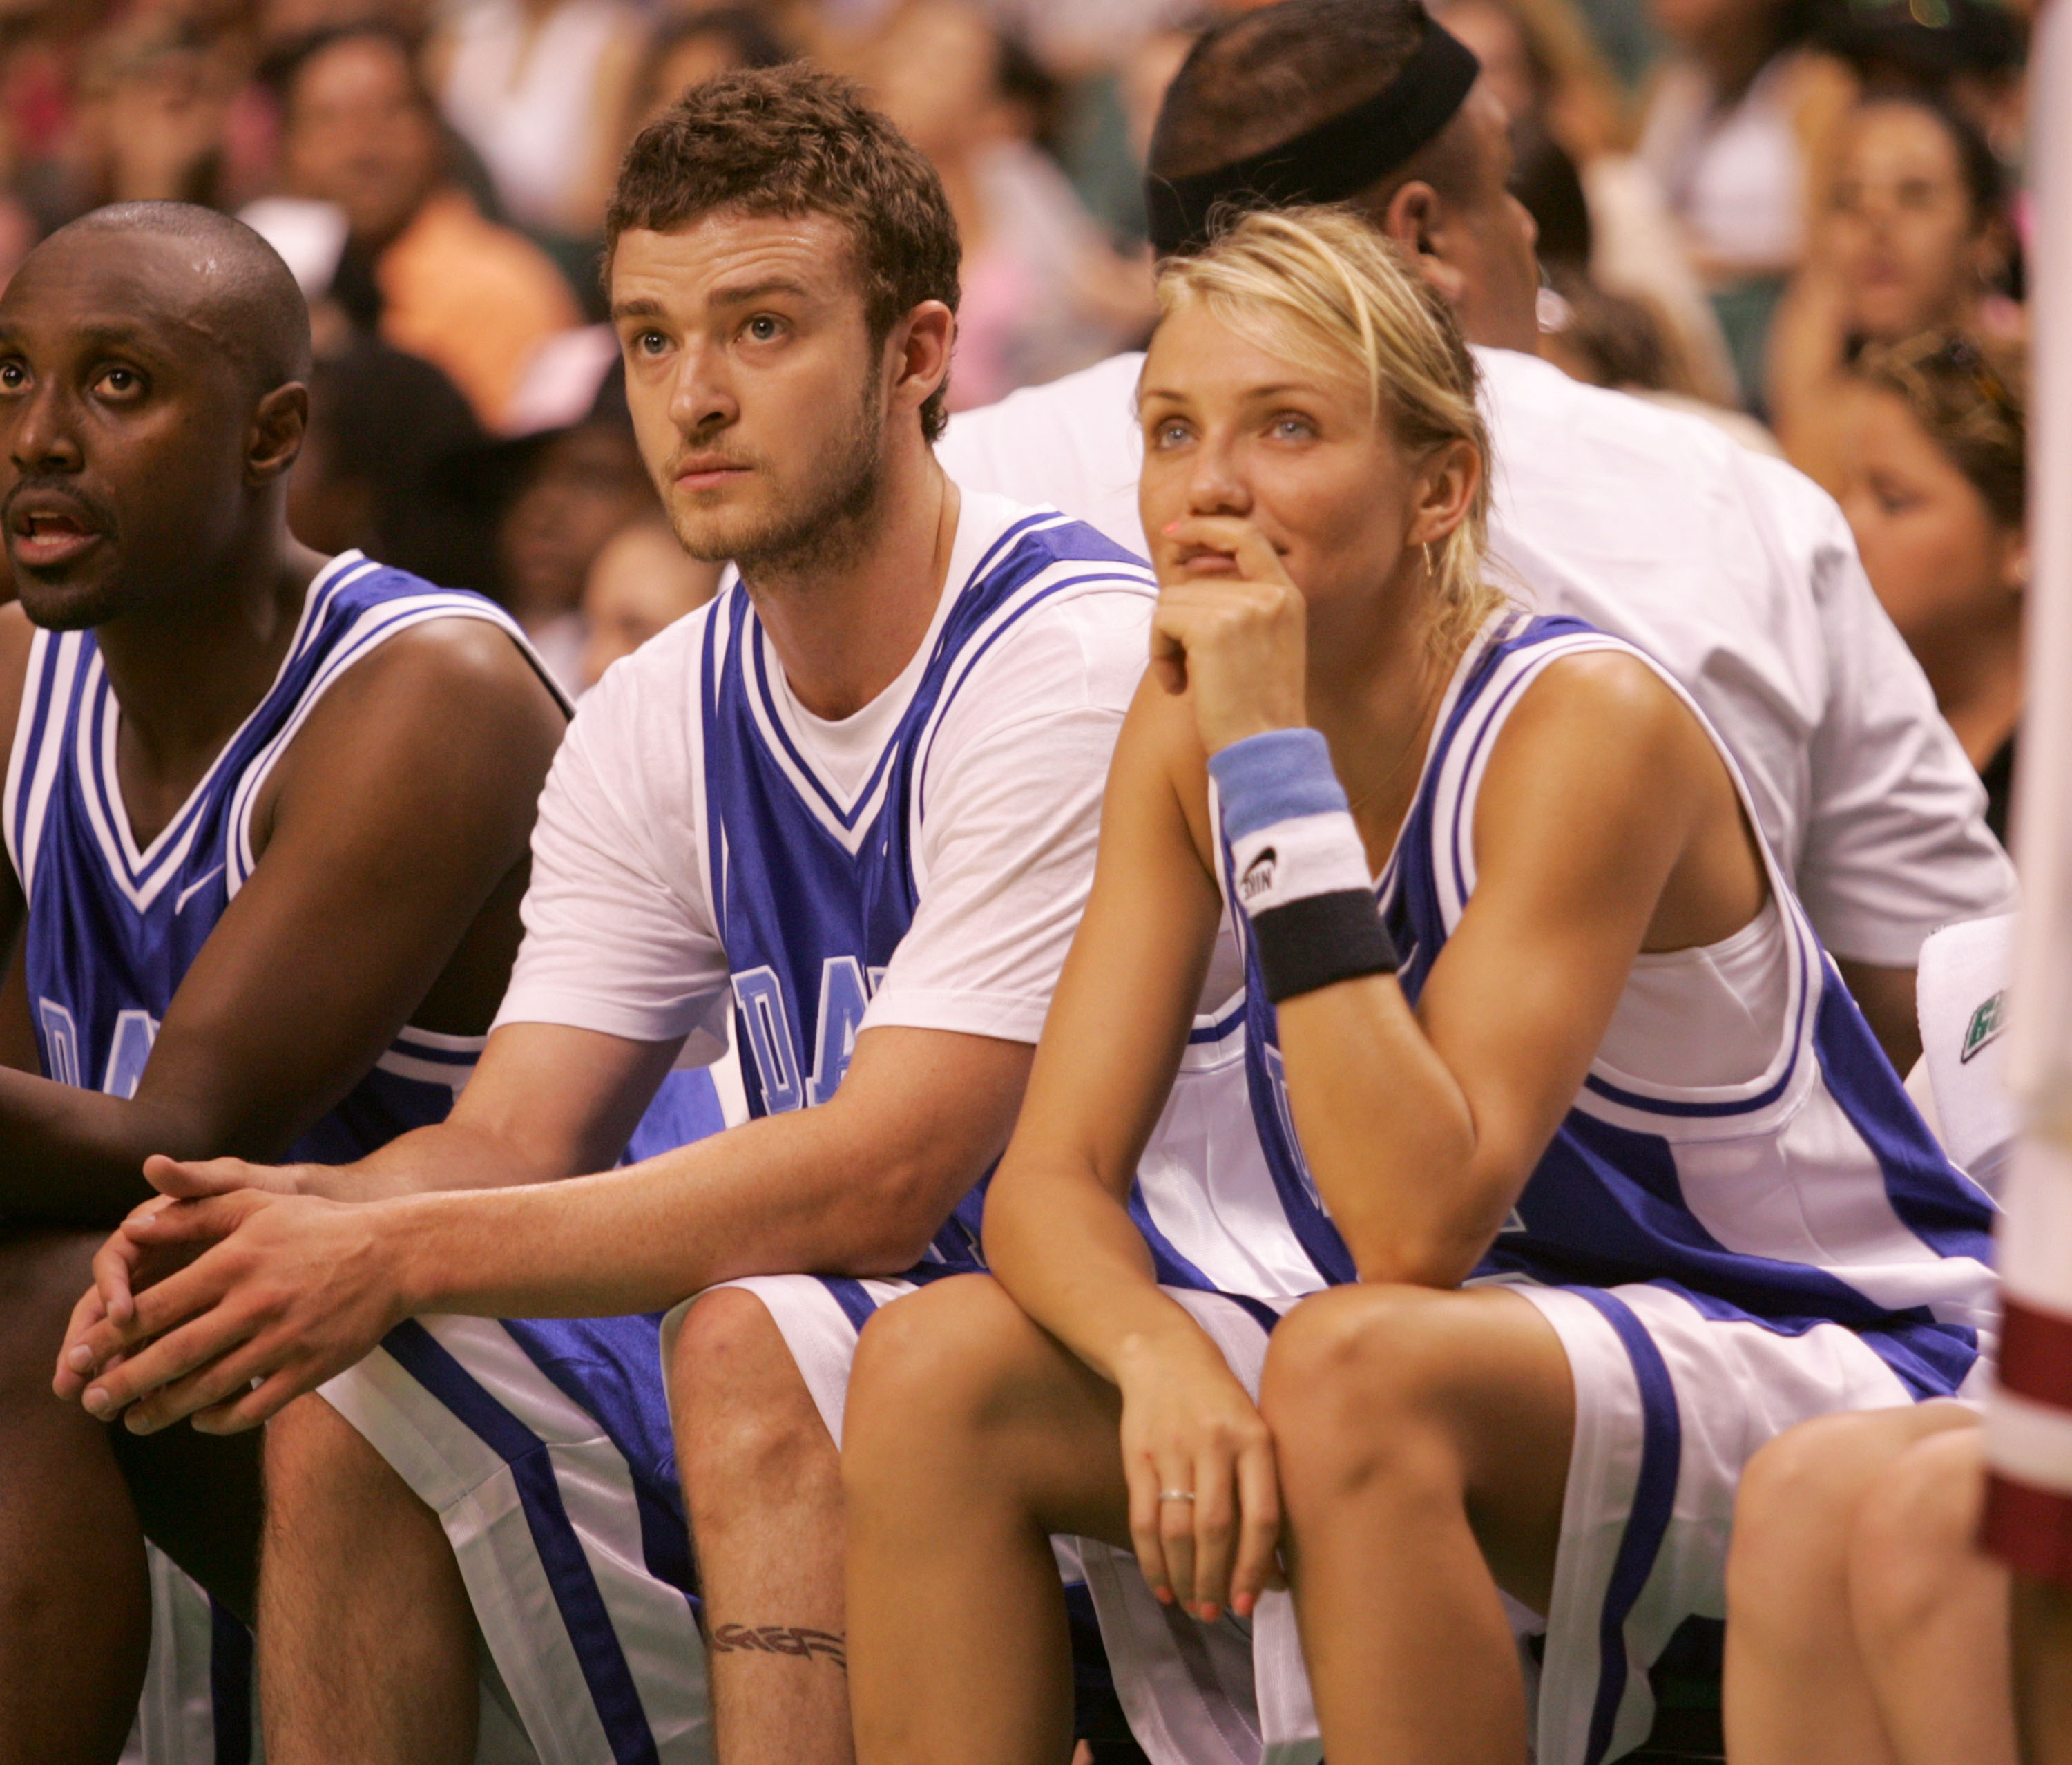 Justin Timberlake and Cameron Diaz during NSYNC's Challenge for the Children VI - Day 3 - basketball game in Sunrise, Florida | Source: Getty Images